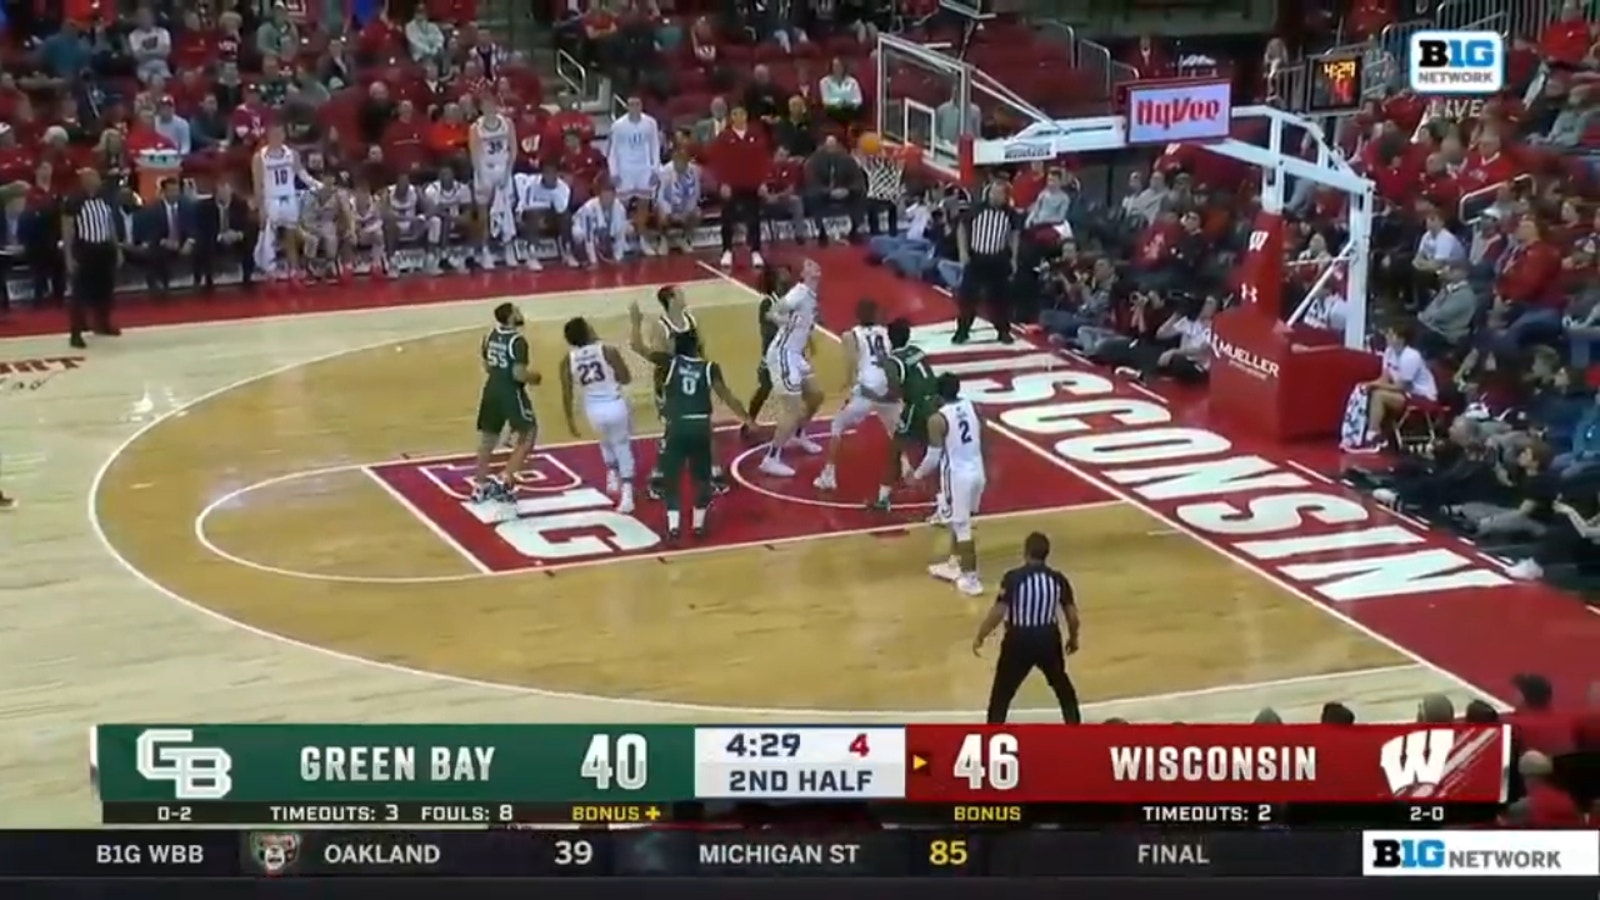 Wisconsin cruises to a 56-45 win over Green Bay